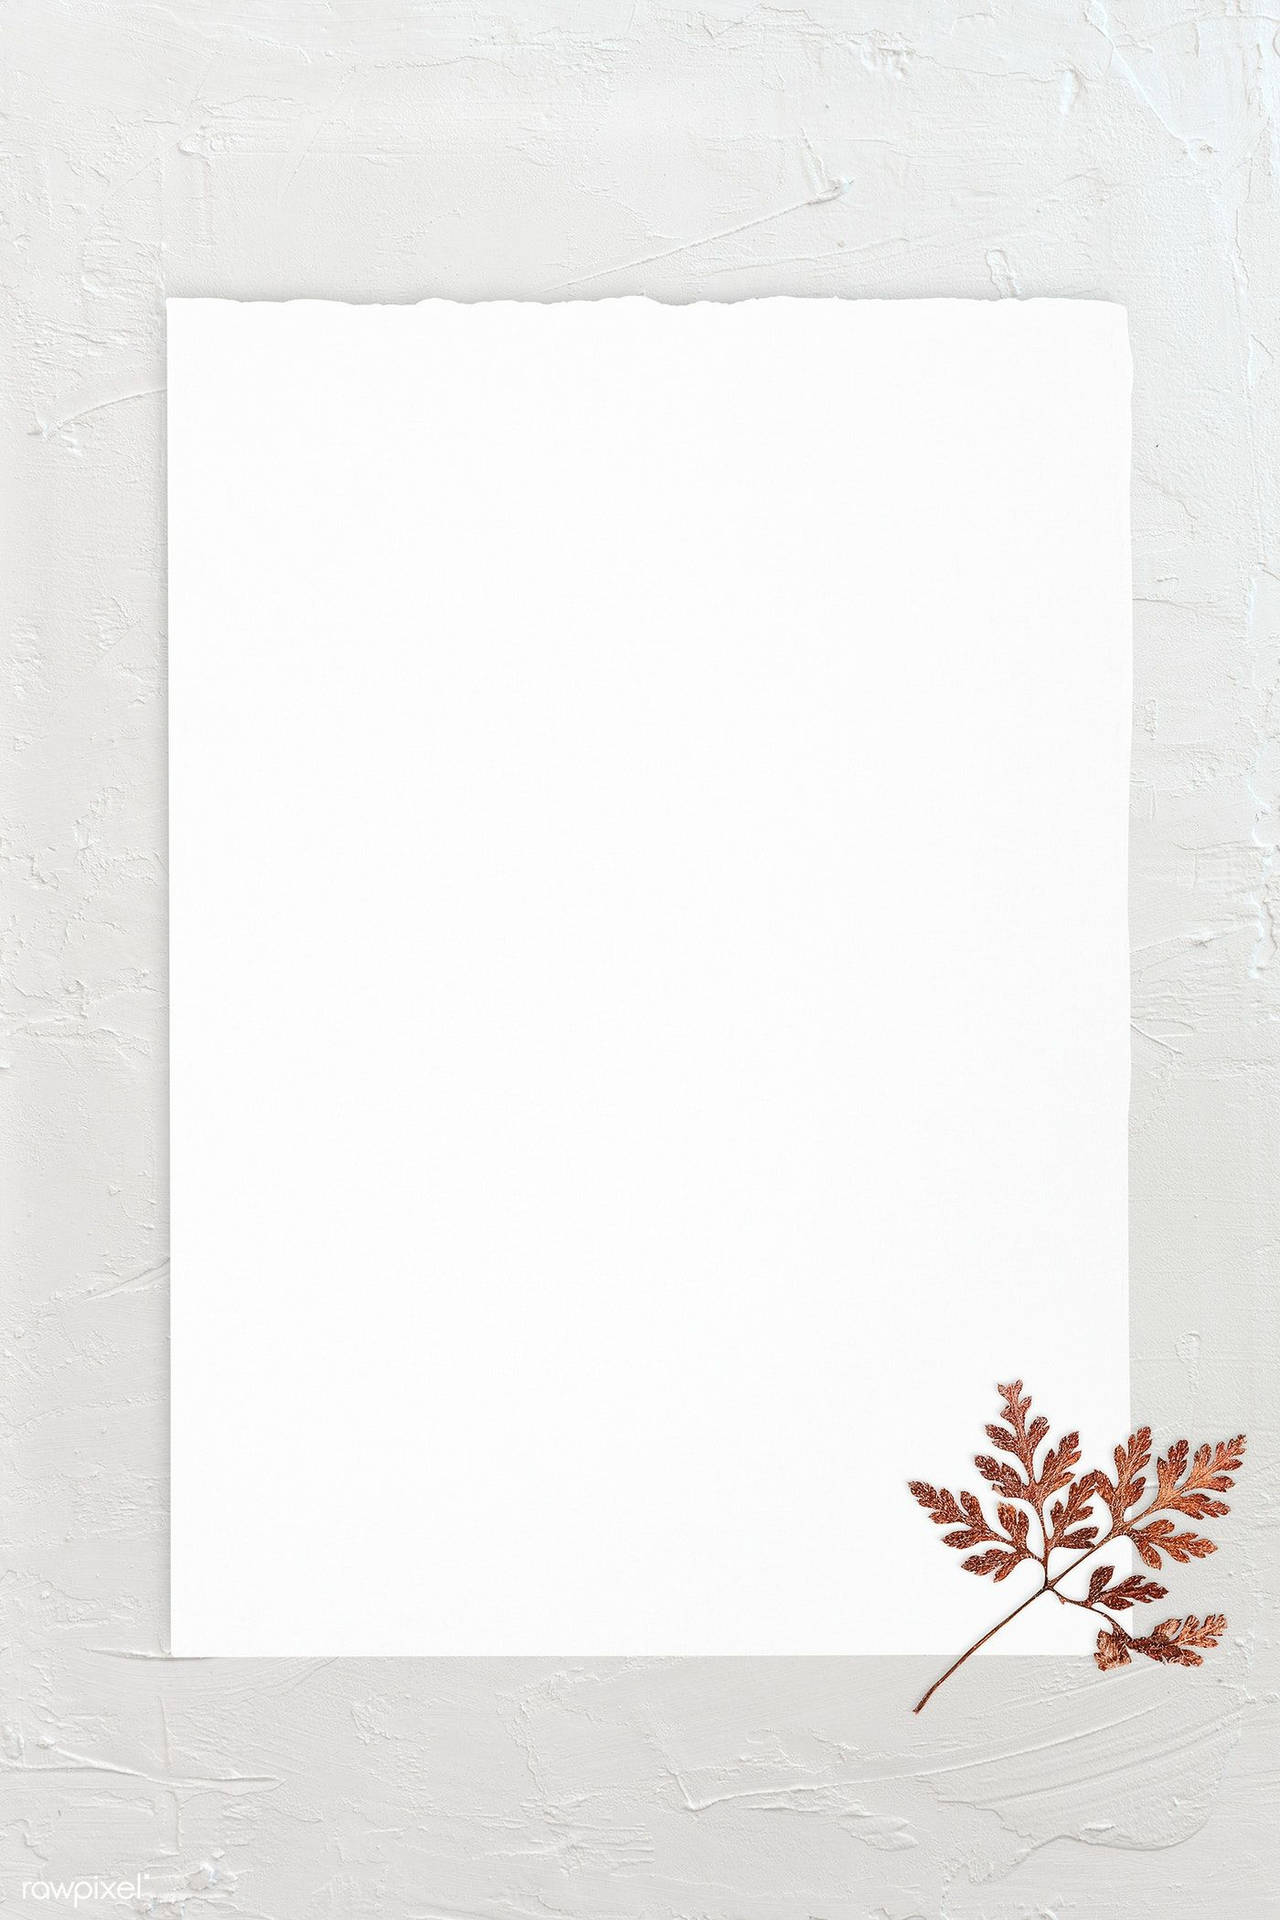 Blank White Frame With Leaf Wallpaper